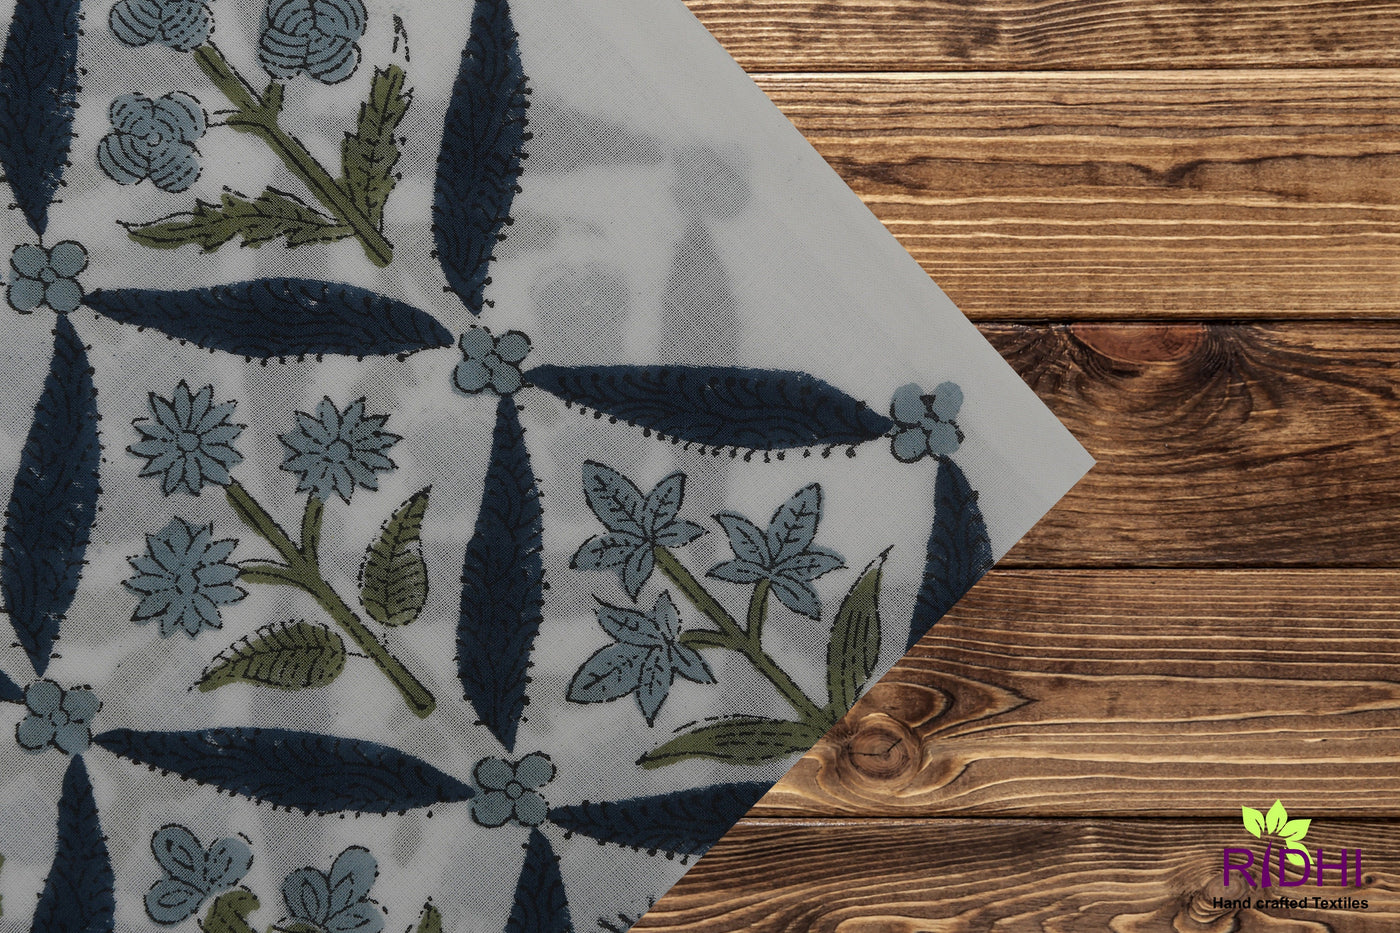 Fabricrush Denim, Stone Blue, Olive Green Indian Hand Block Printed 100% Pure Cotton Cloth, Fabric by the yard, Women's Clothing Curtains Table Runners